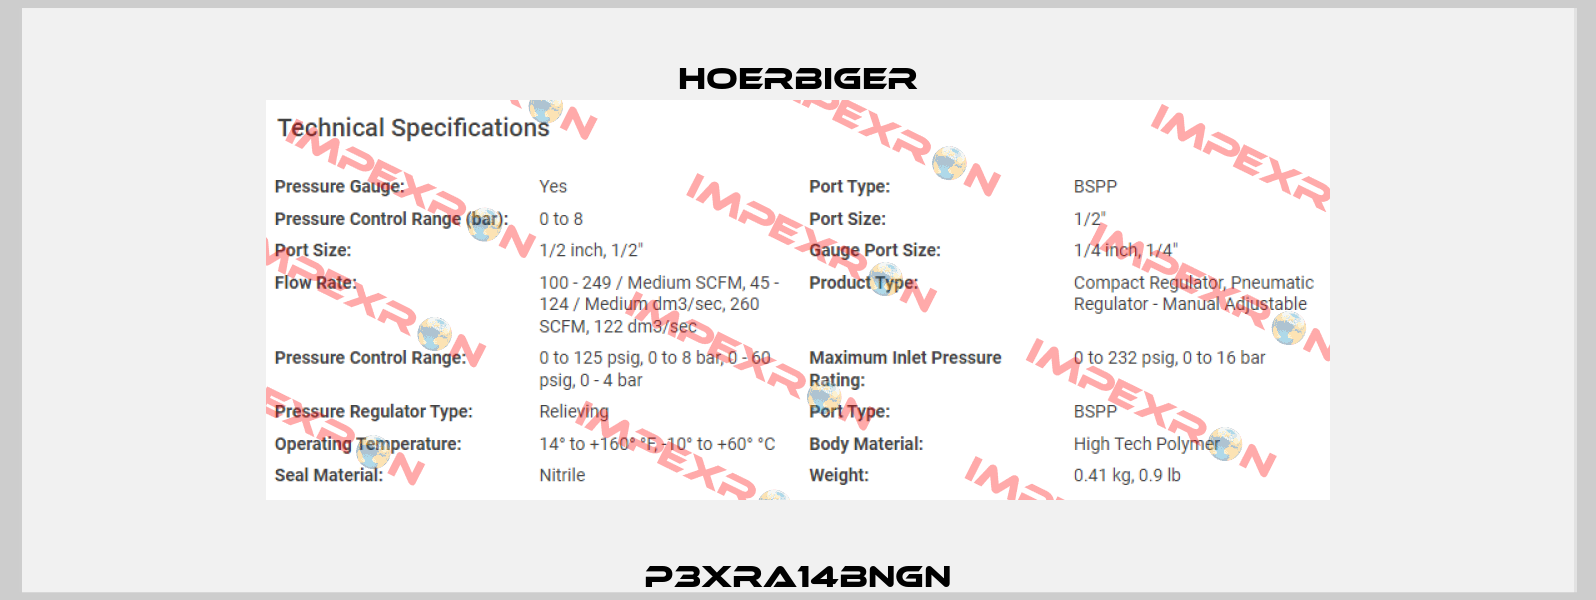 P3XRA14BNGN Hoerbiger